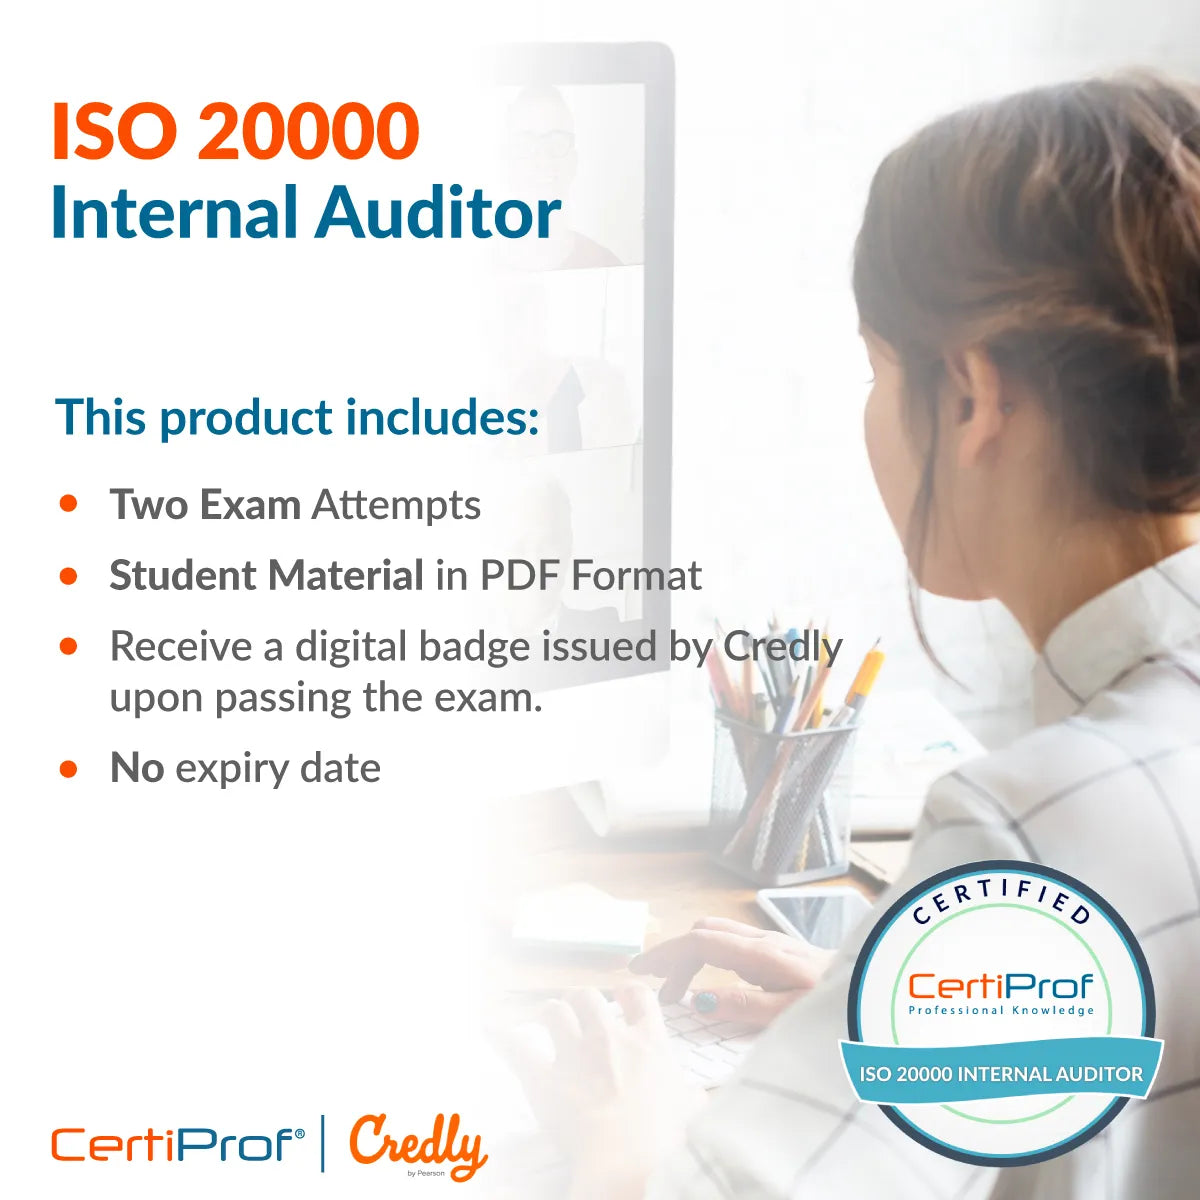 Content Description For ISO 20000 Internal Auditor